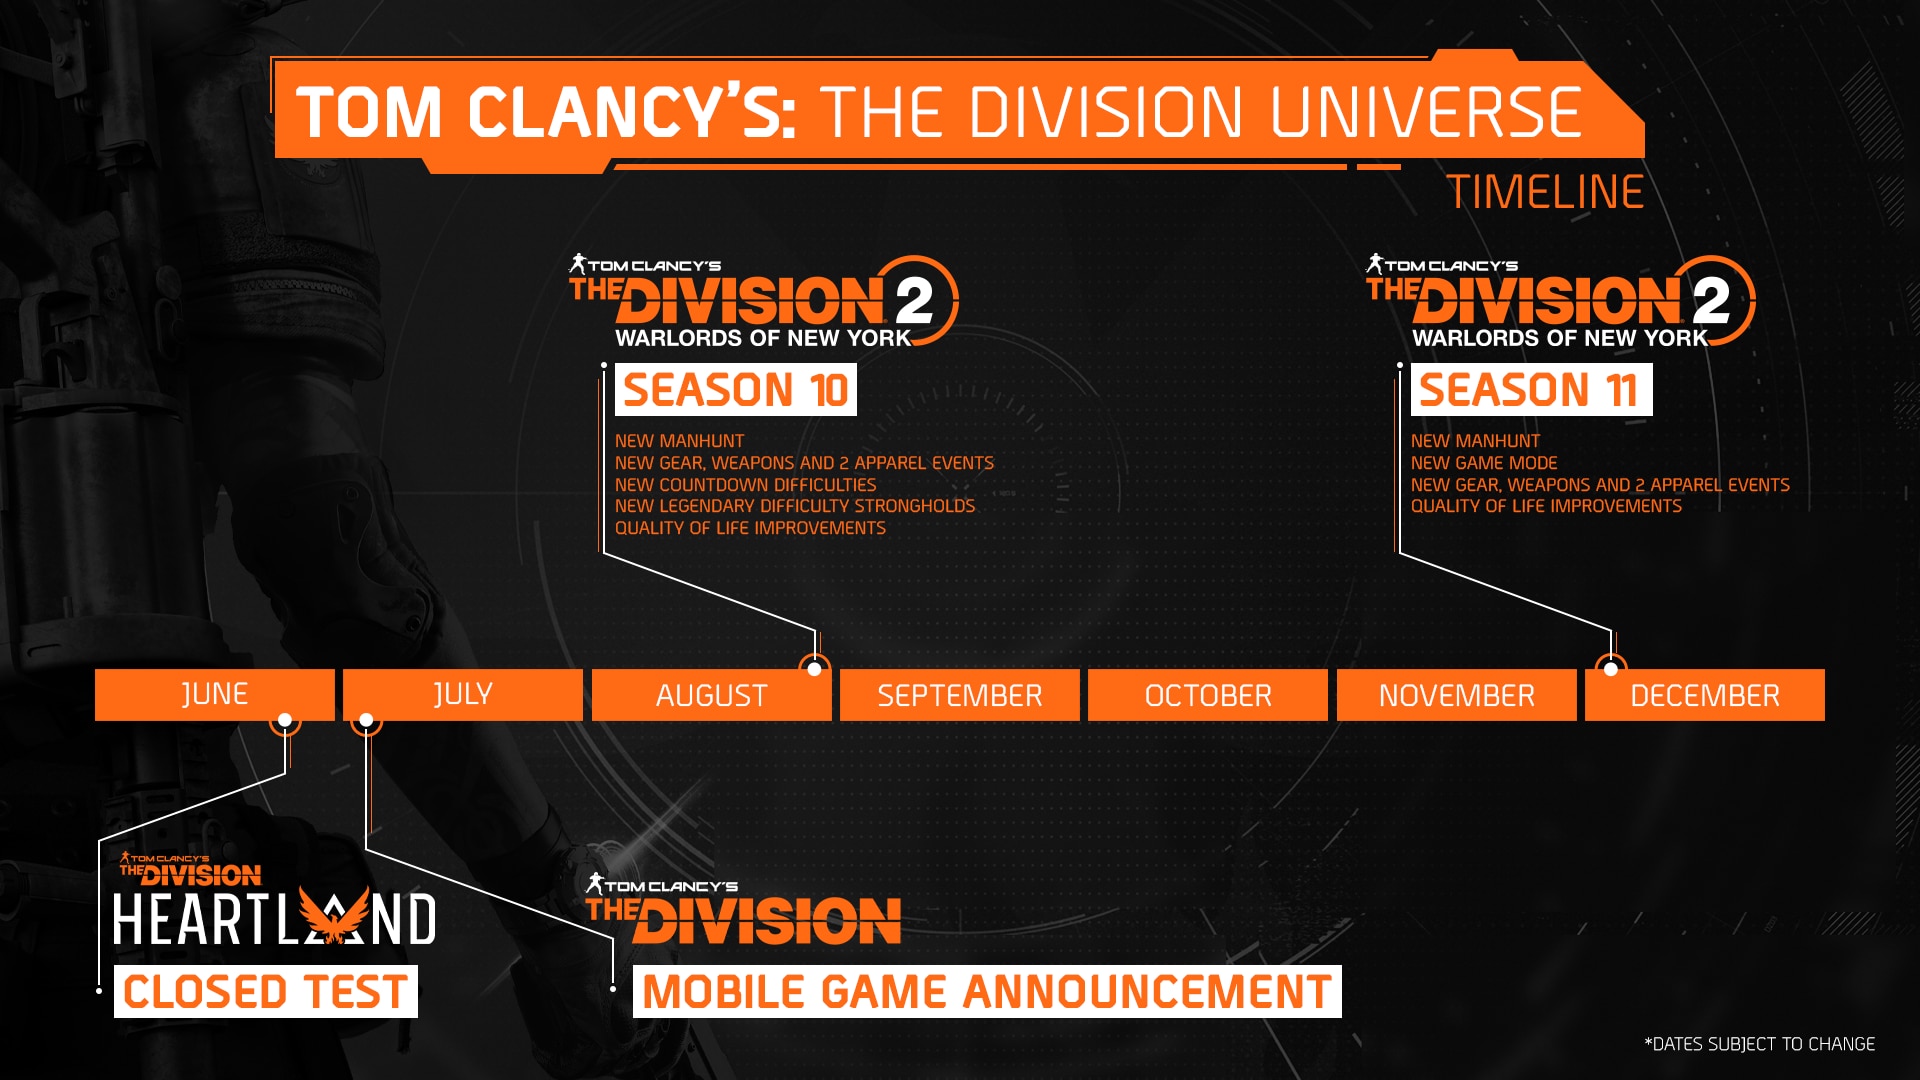 [TCTD2] The Division roadmap update - Roadmap to illustrate the text